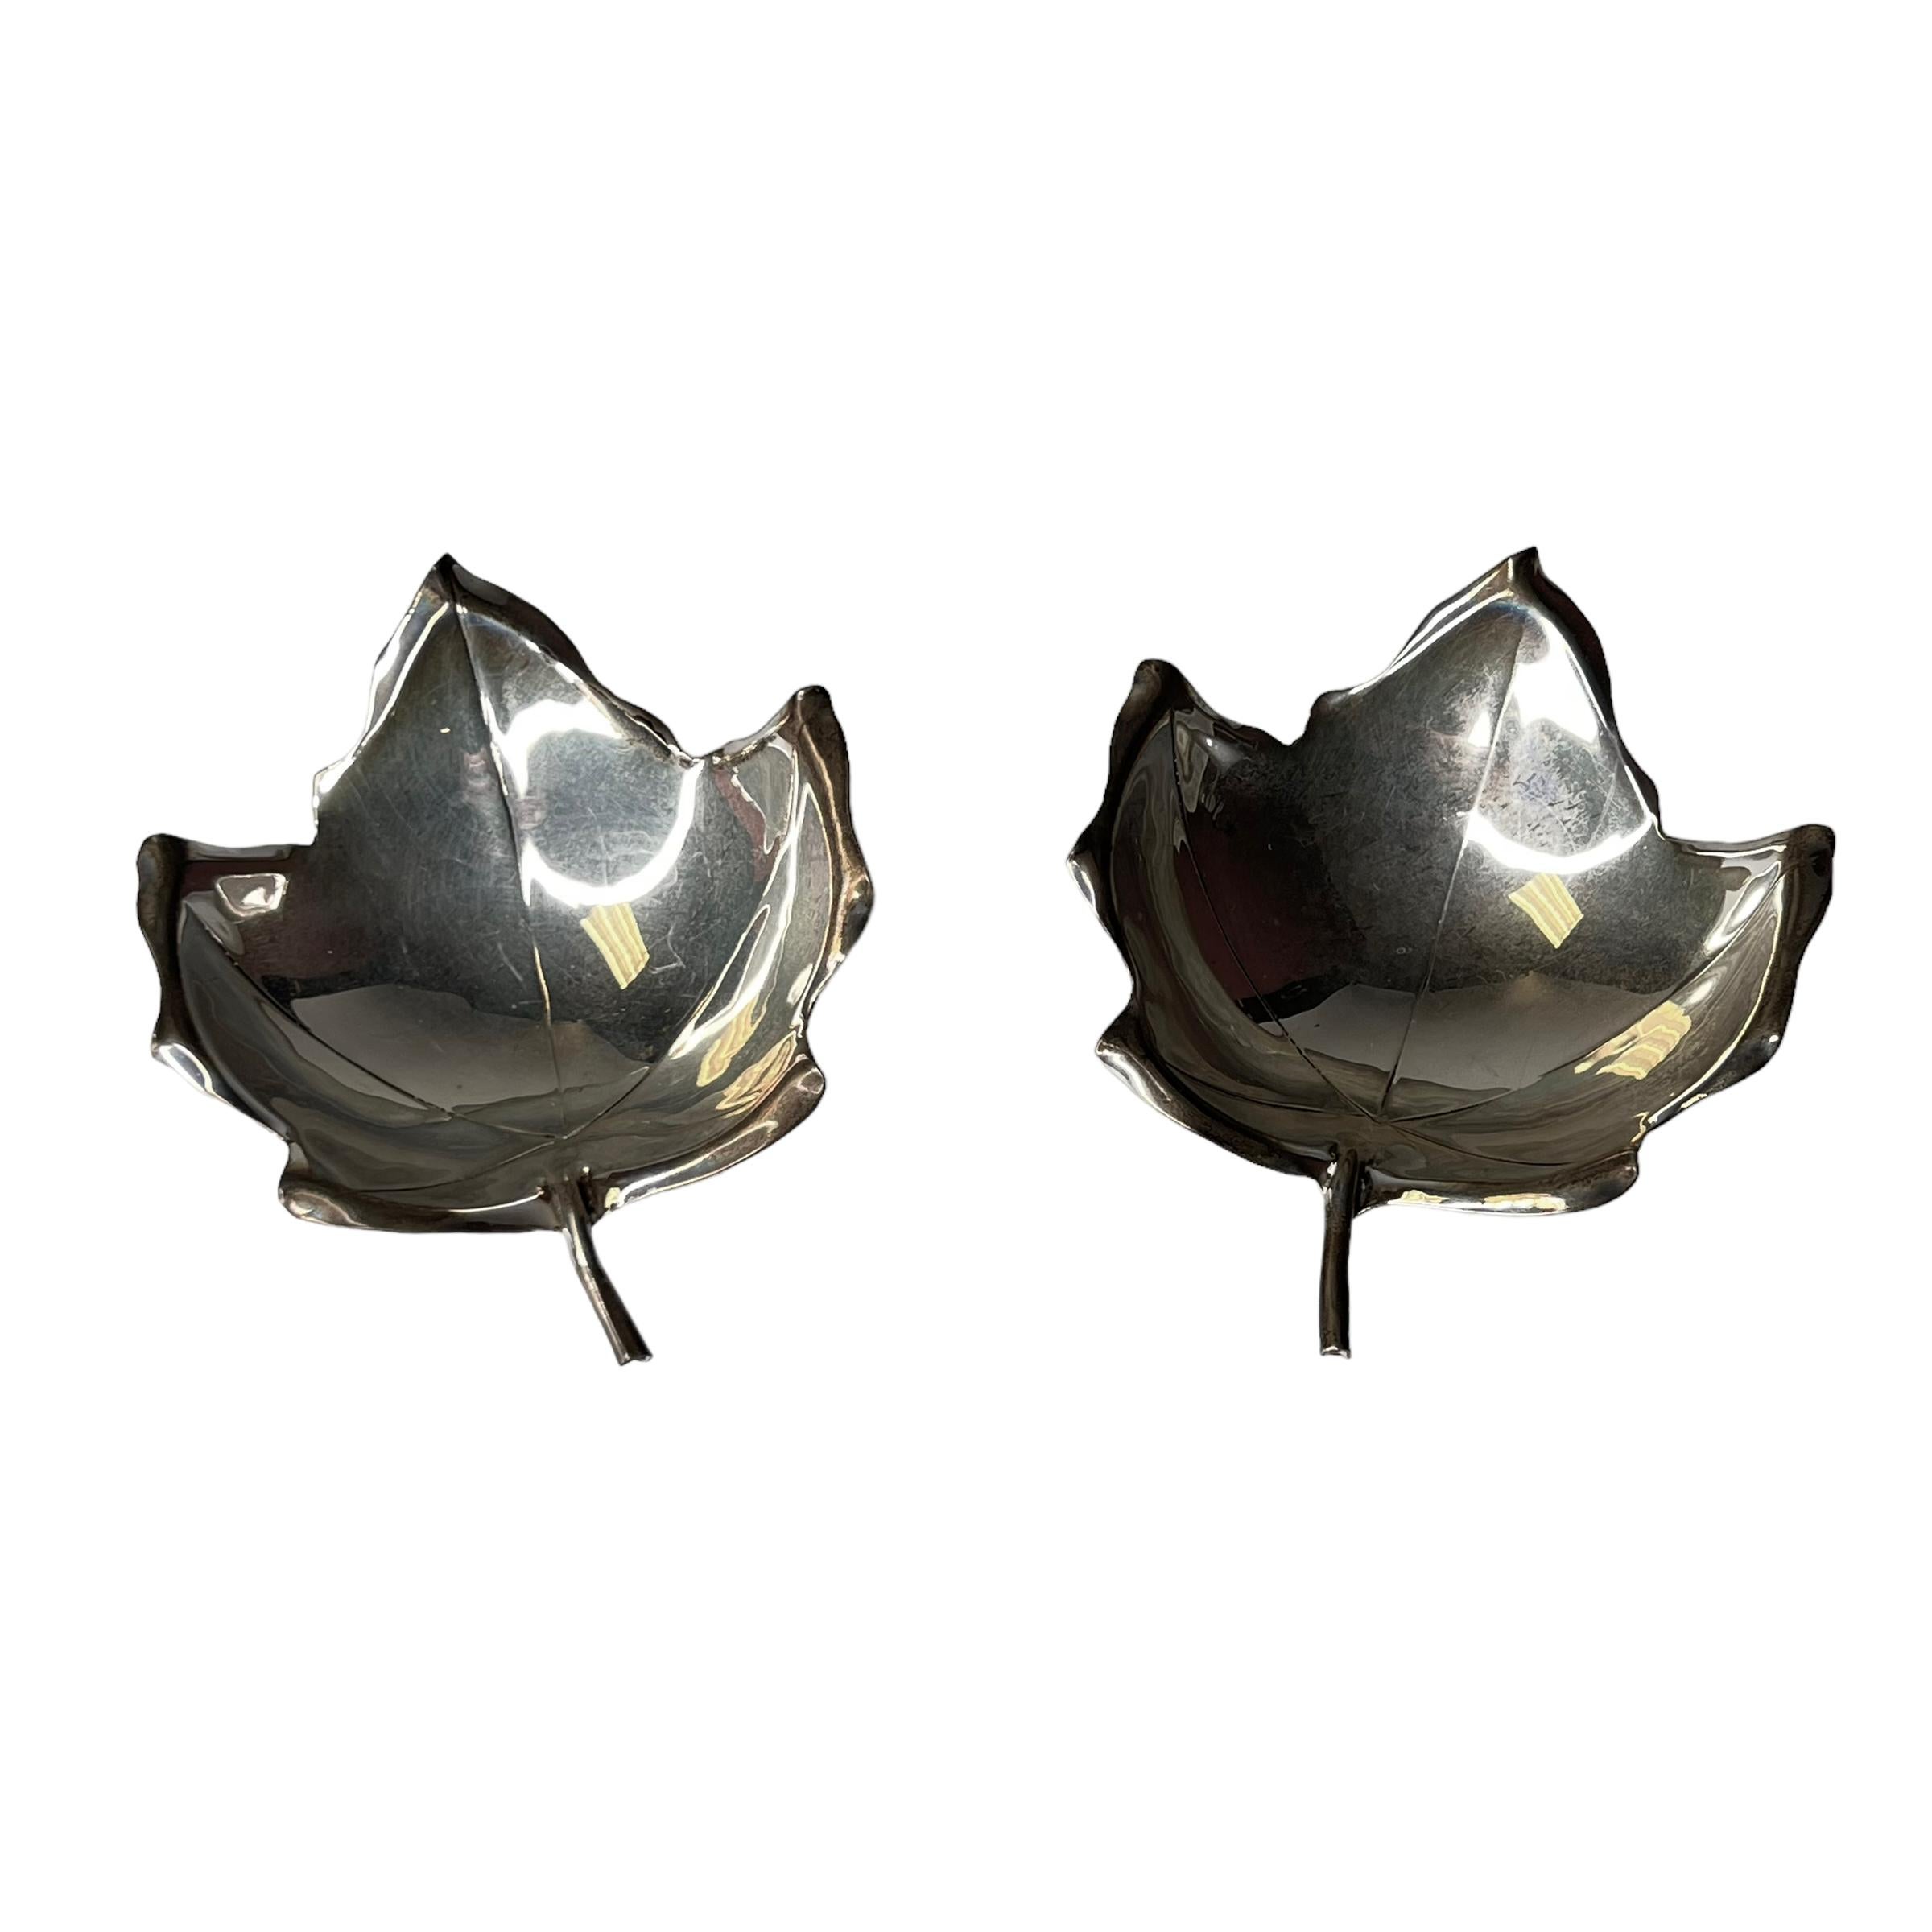 Our pair of sterling silver dishes in the form of maple leaves are raised on three ball shaped feet and come with their original gift case. Each approximately 3.5 by 4.5 by 1 1/18 inches. Case 9 1/8 by 5 by 1 7/8 inches. Each in good condition.